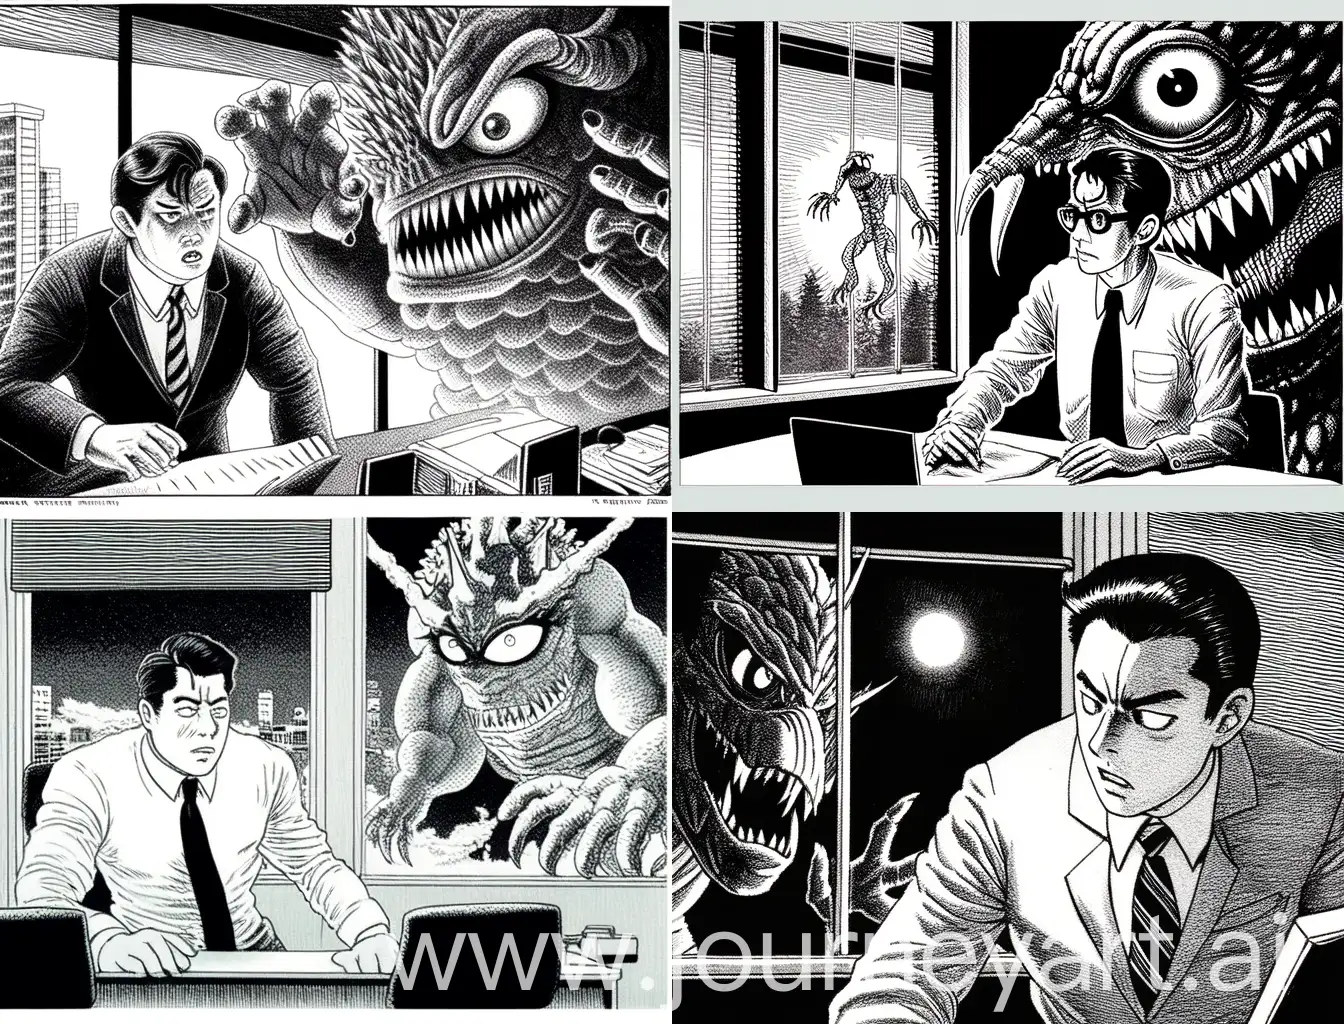 Vintage-Manga-Style-Illustration-LateNight-Office-Worker-and-Giant-Monster